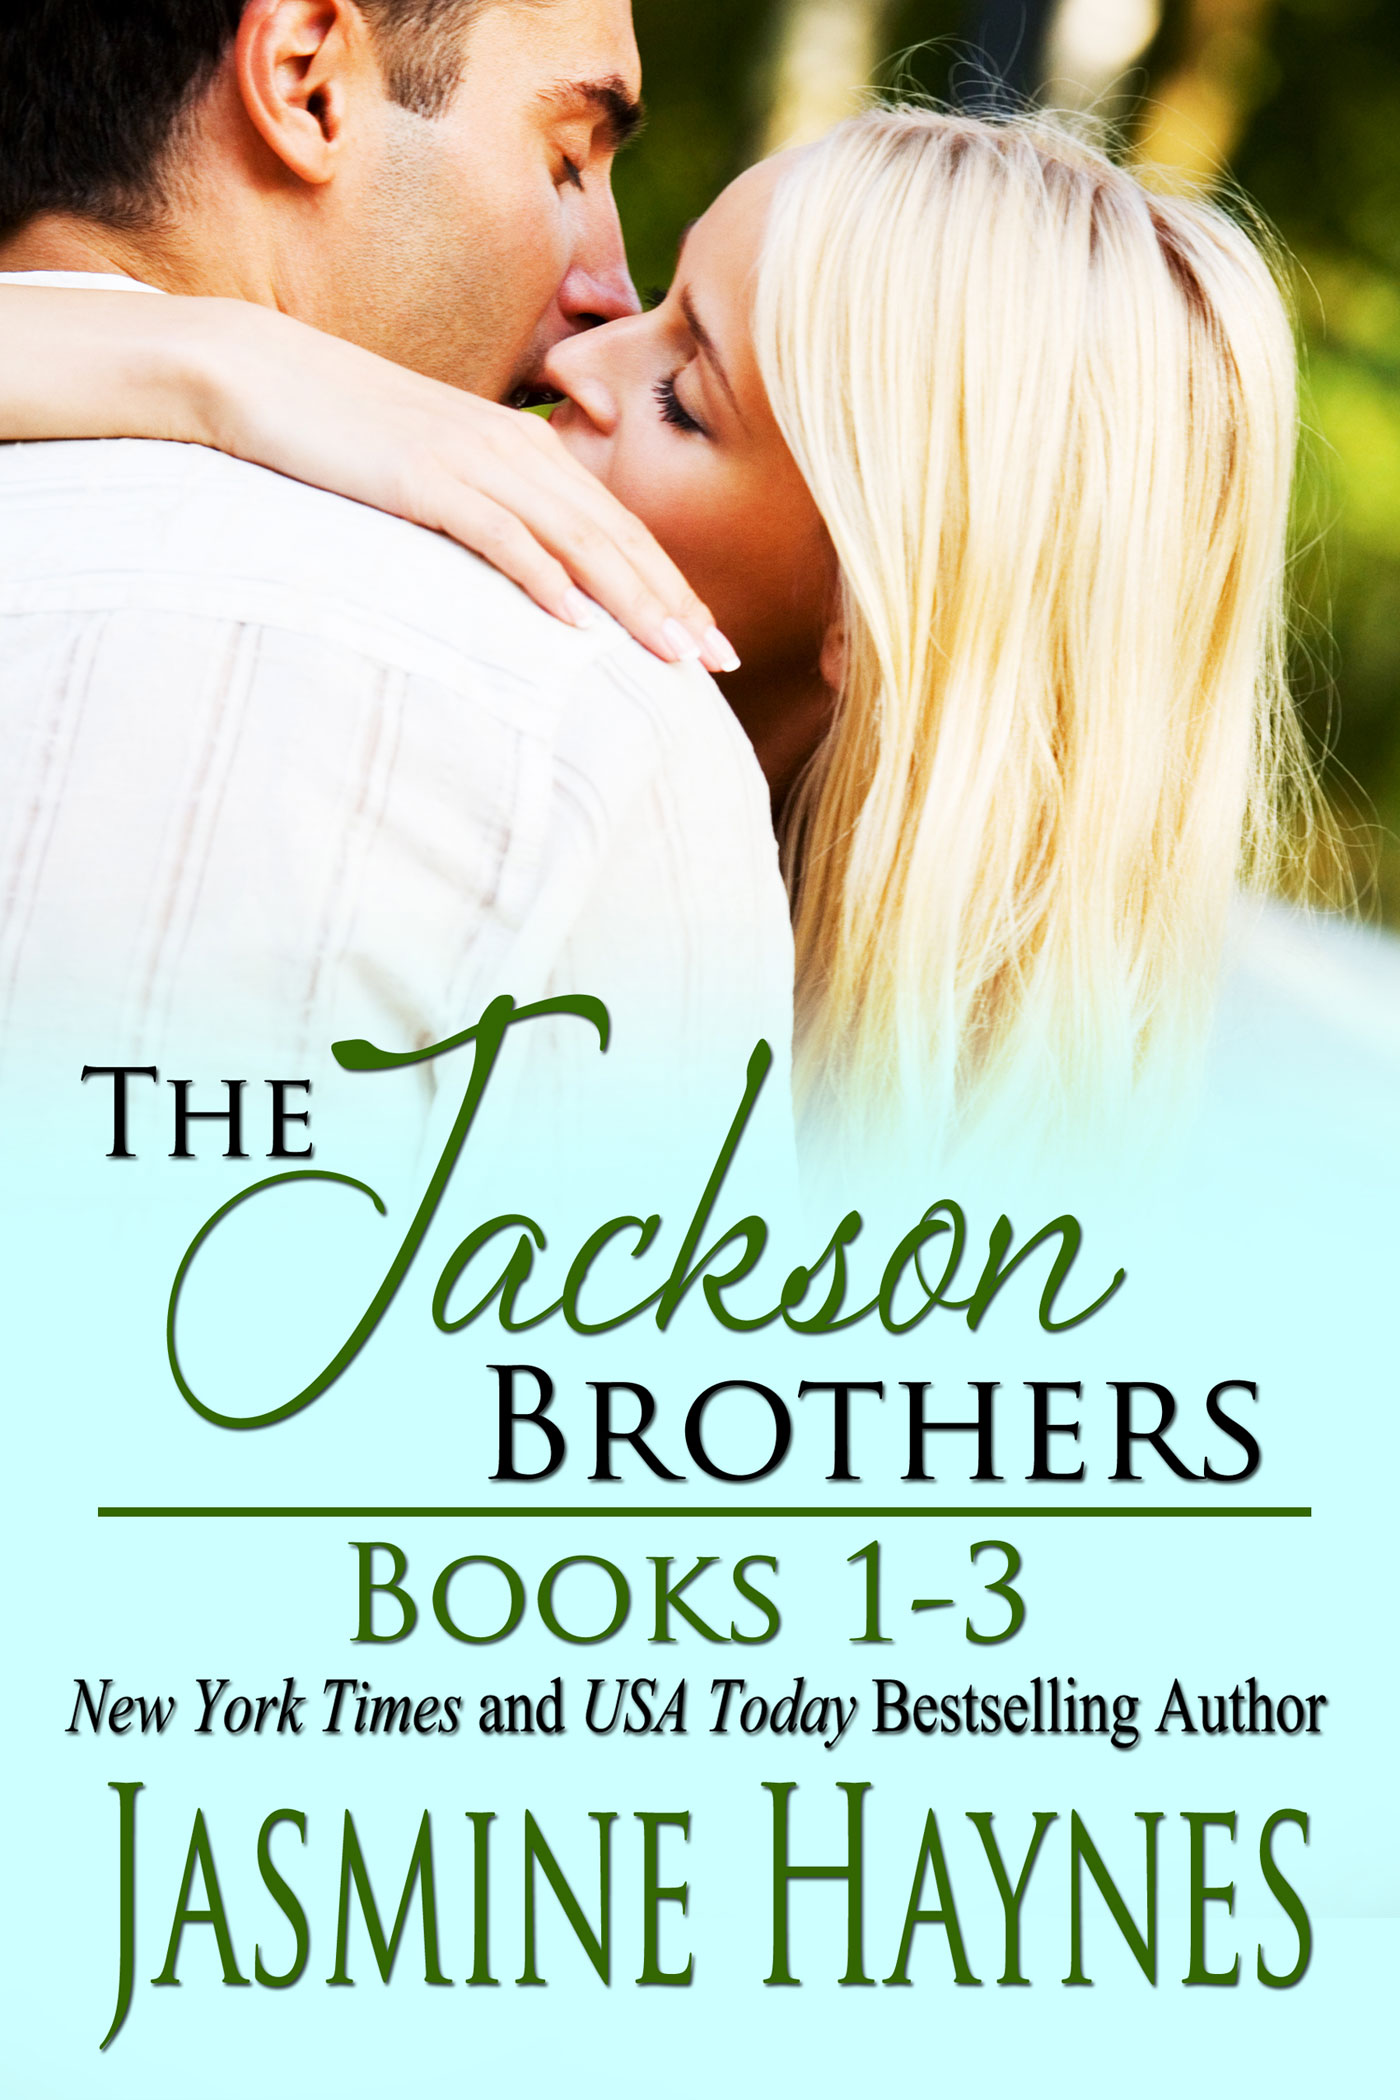 Cover of The Jackson Brothers Books 1-3 by New York Times and USA Today Bestselling Author Jasmine Haynes